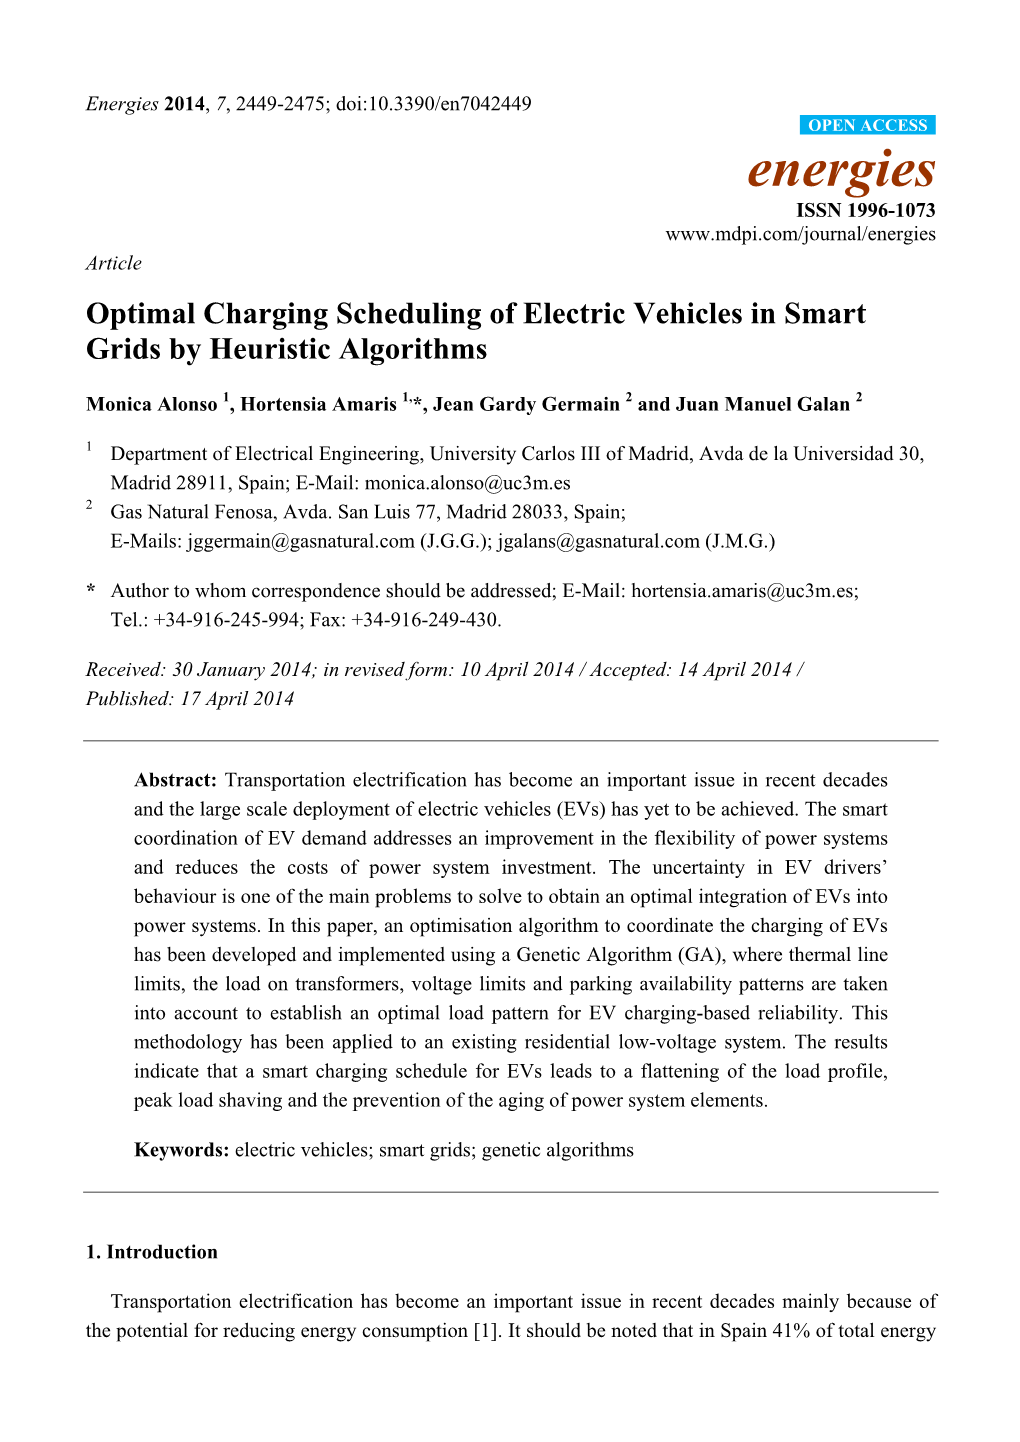 Optimal Charging Scheduling of Electric Vehicles in Smart Grids by Heuristic Algorithms